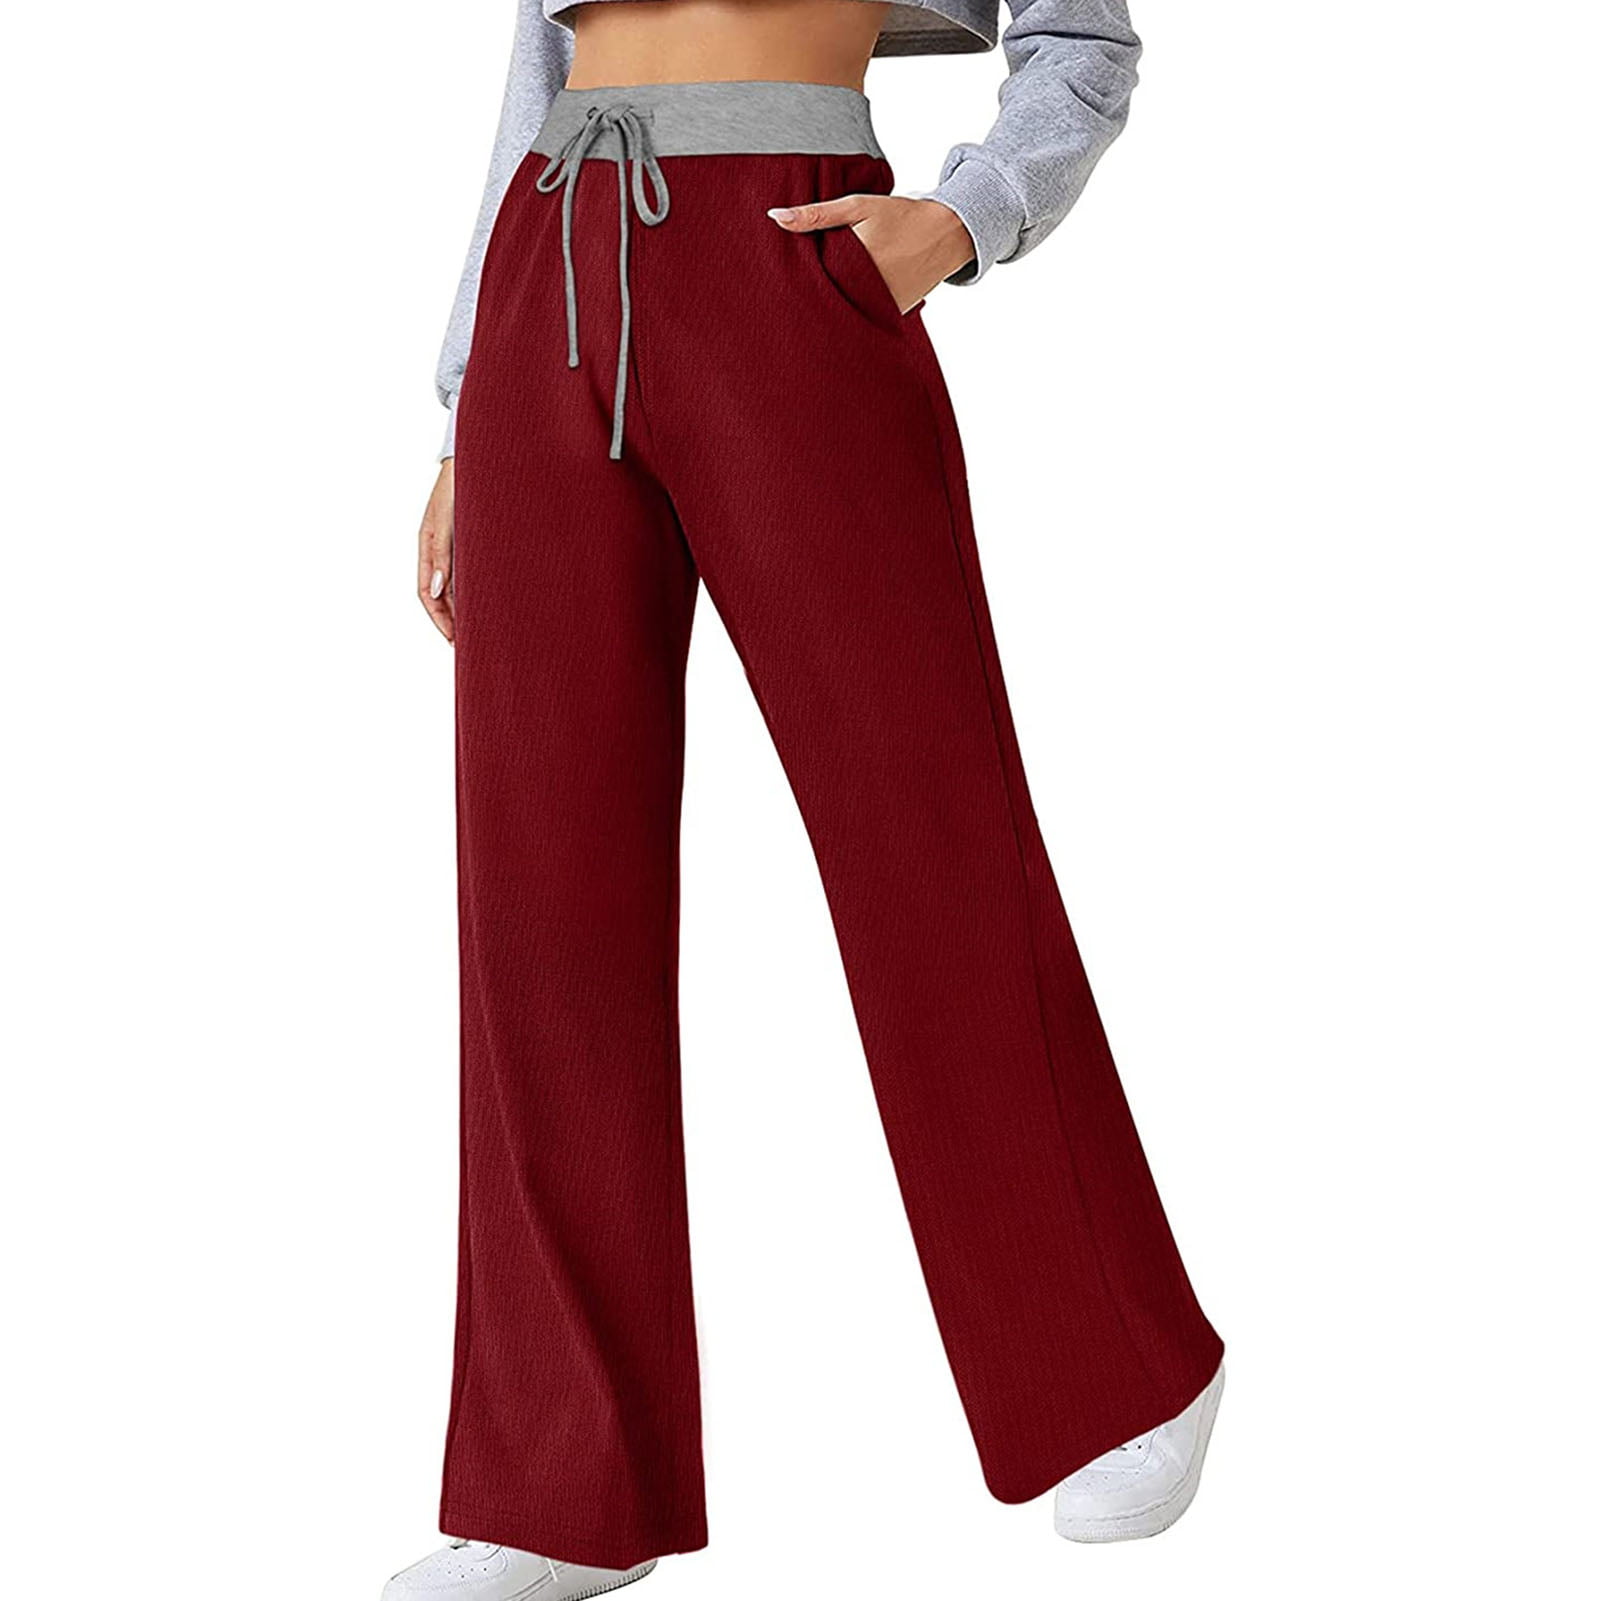 OWNORA Womens Comfy Sweatpants Joggers with Pockets Elastic High Waist Loose Fit Baggy Lounge Pants Bottoms 